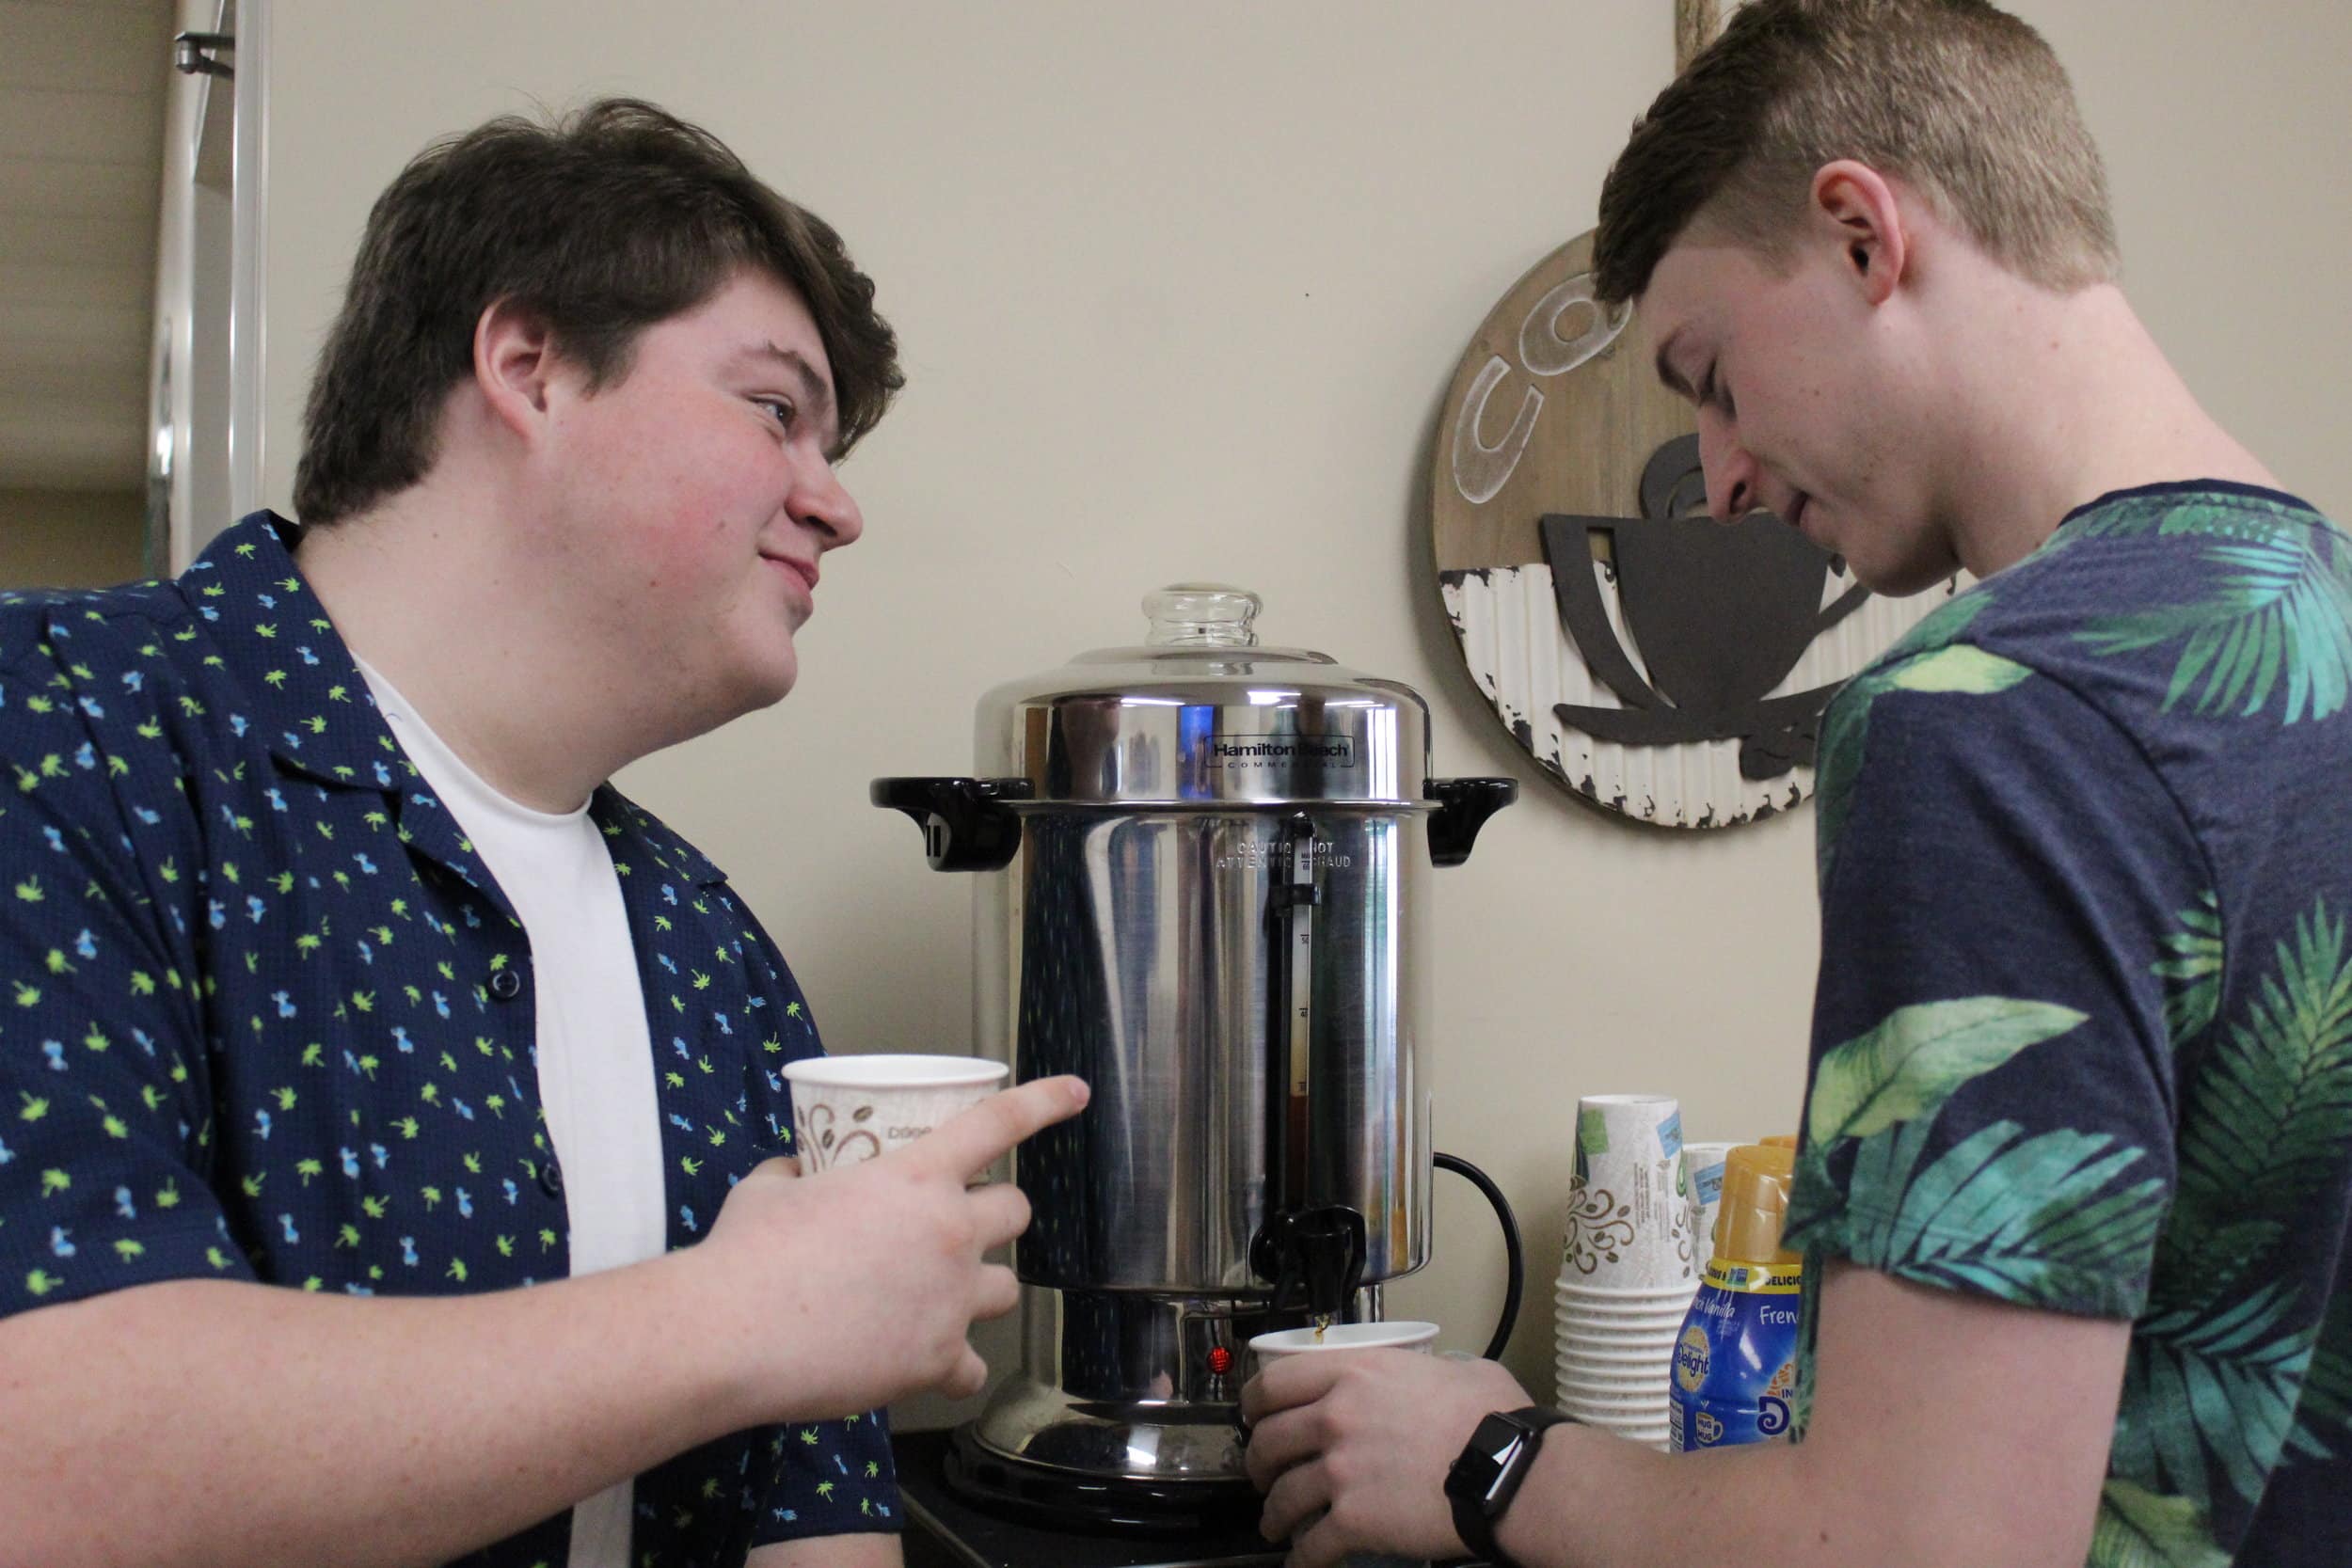 Pictured here is Jameson Evatt and Nathan Ingle fellowshipping over a cup of coffee before Sunday morning service.